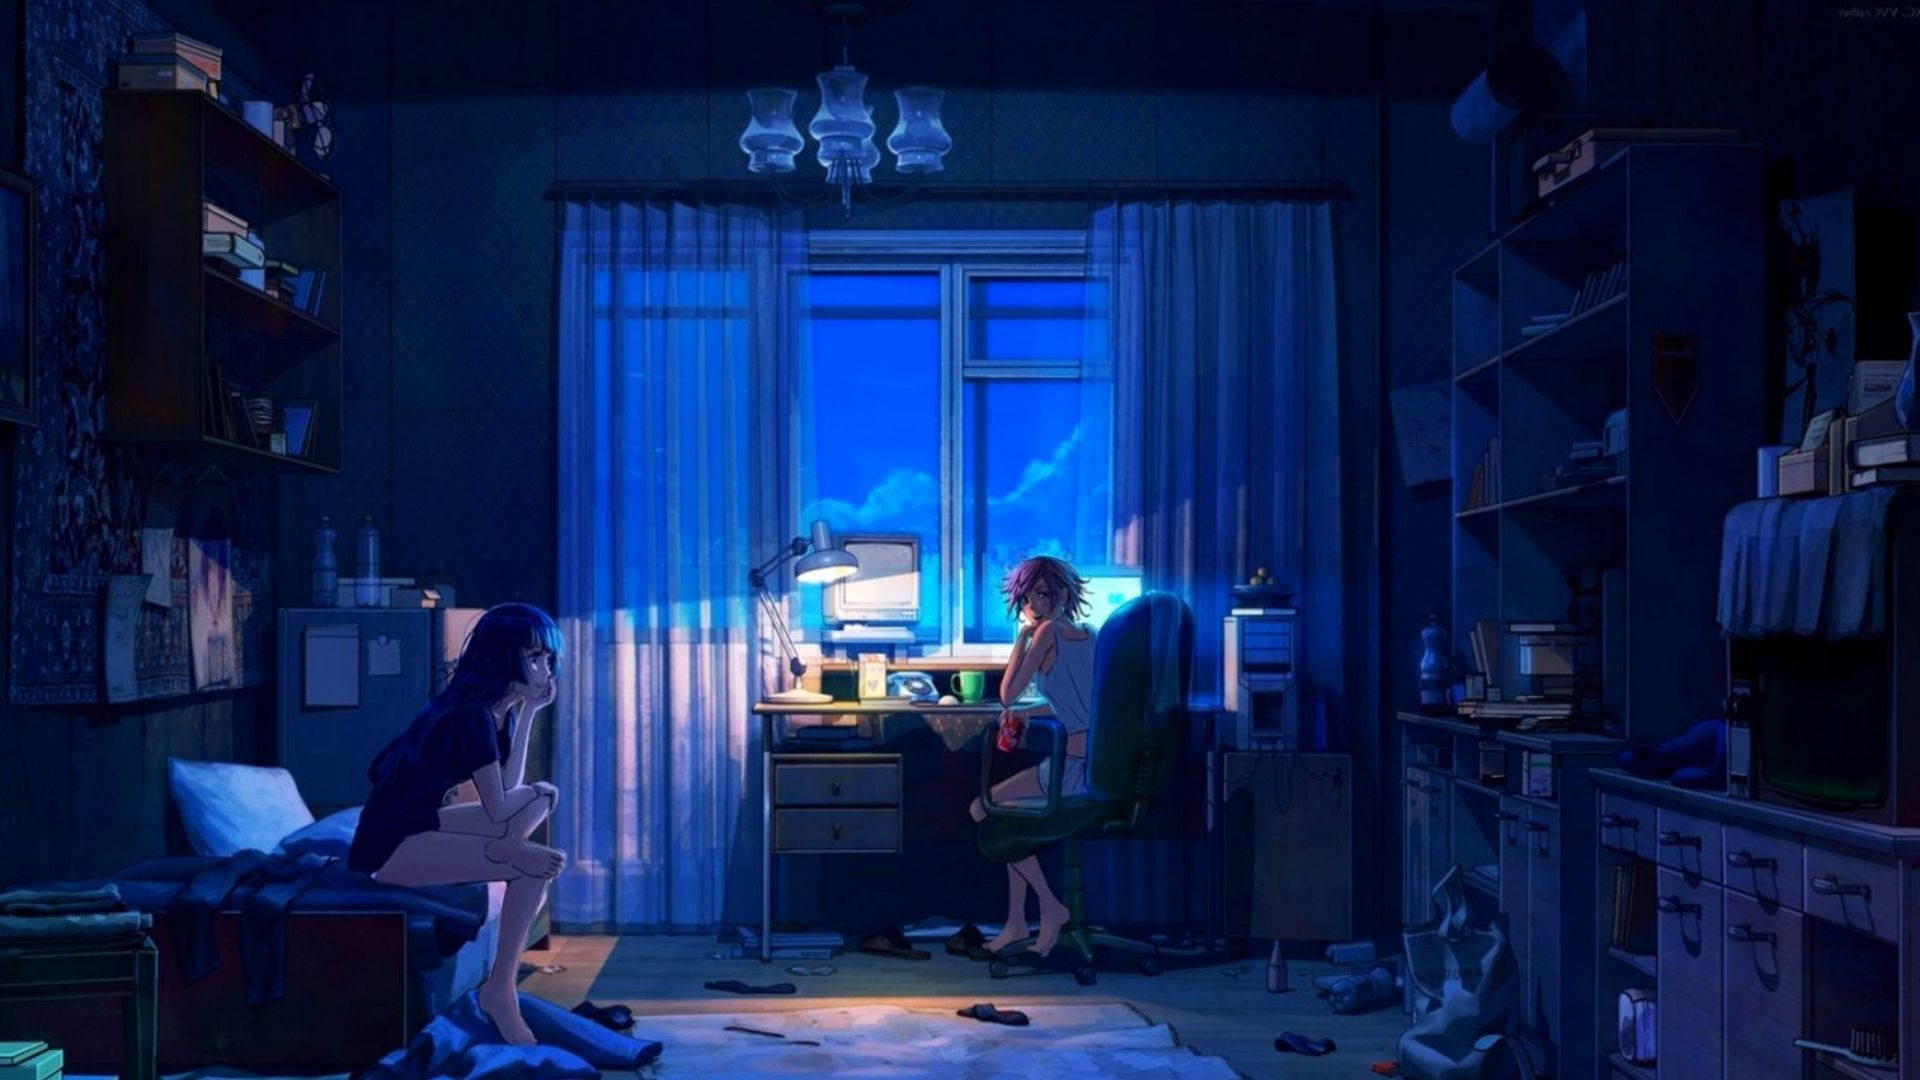 Couple In Anime Room